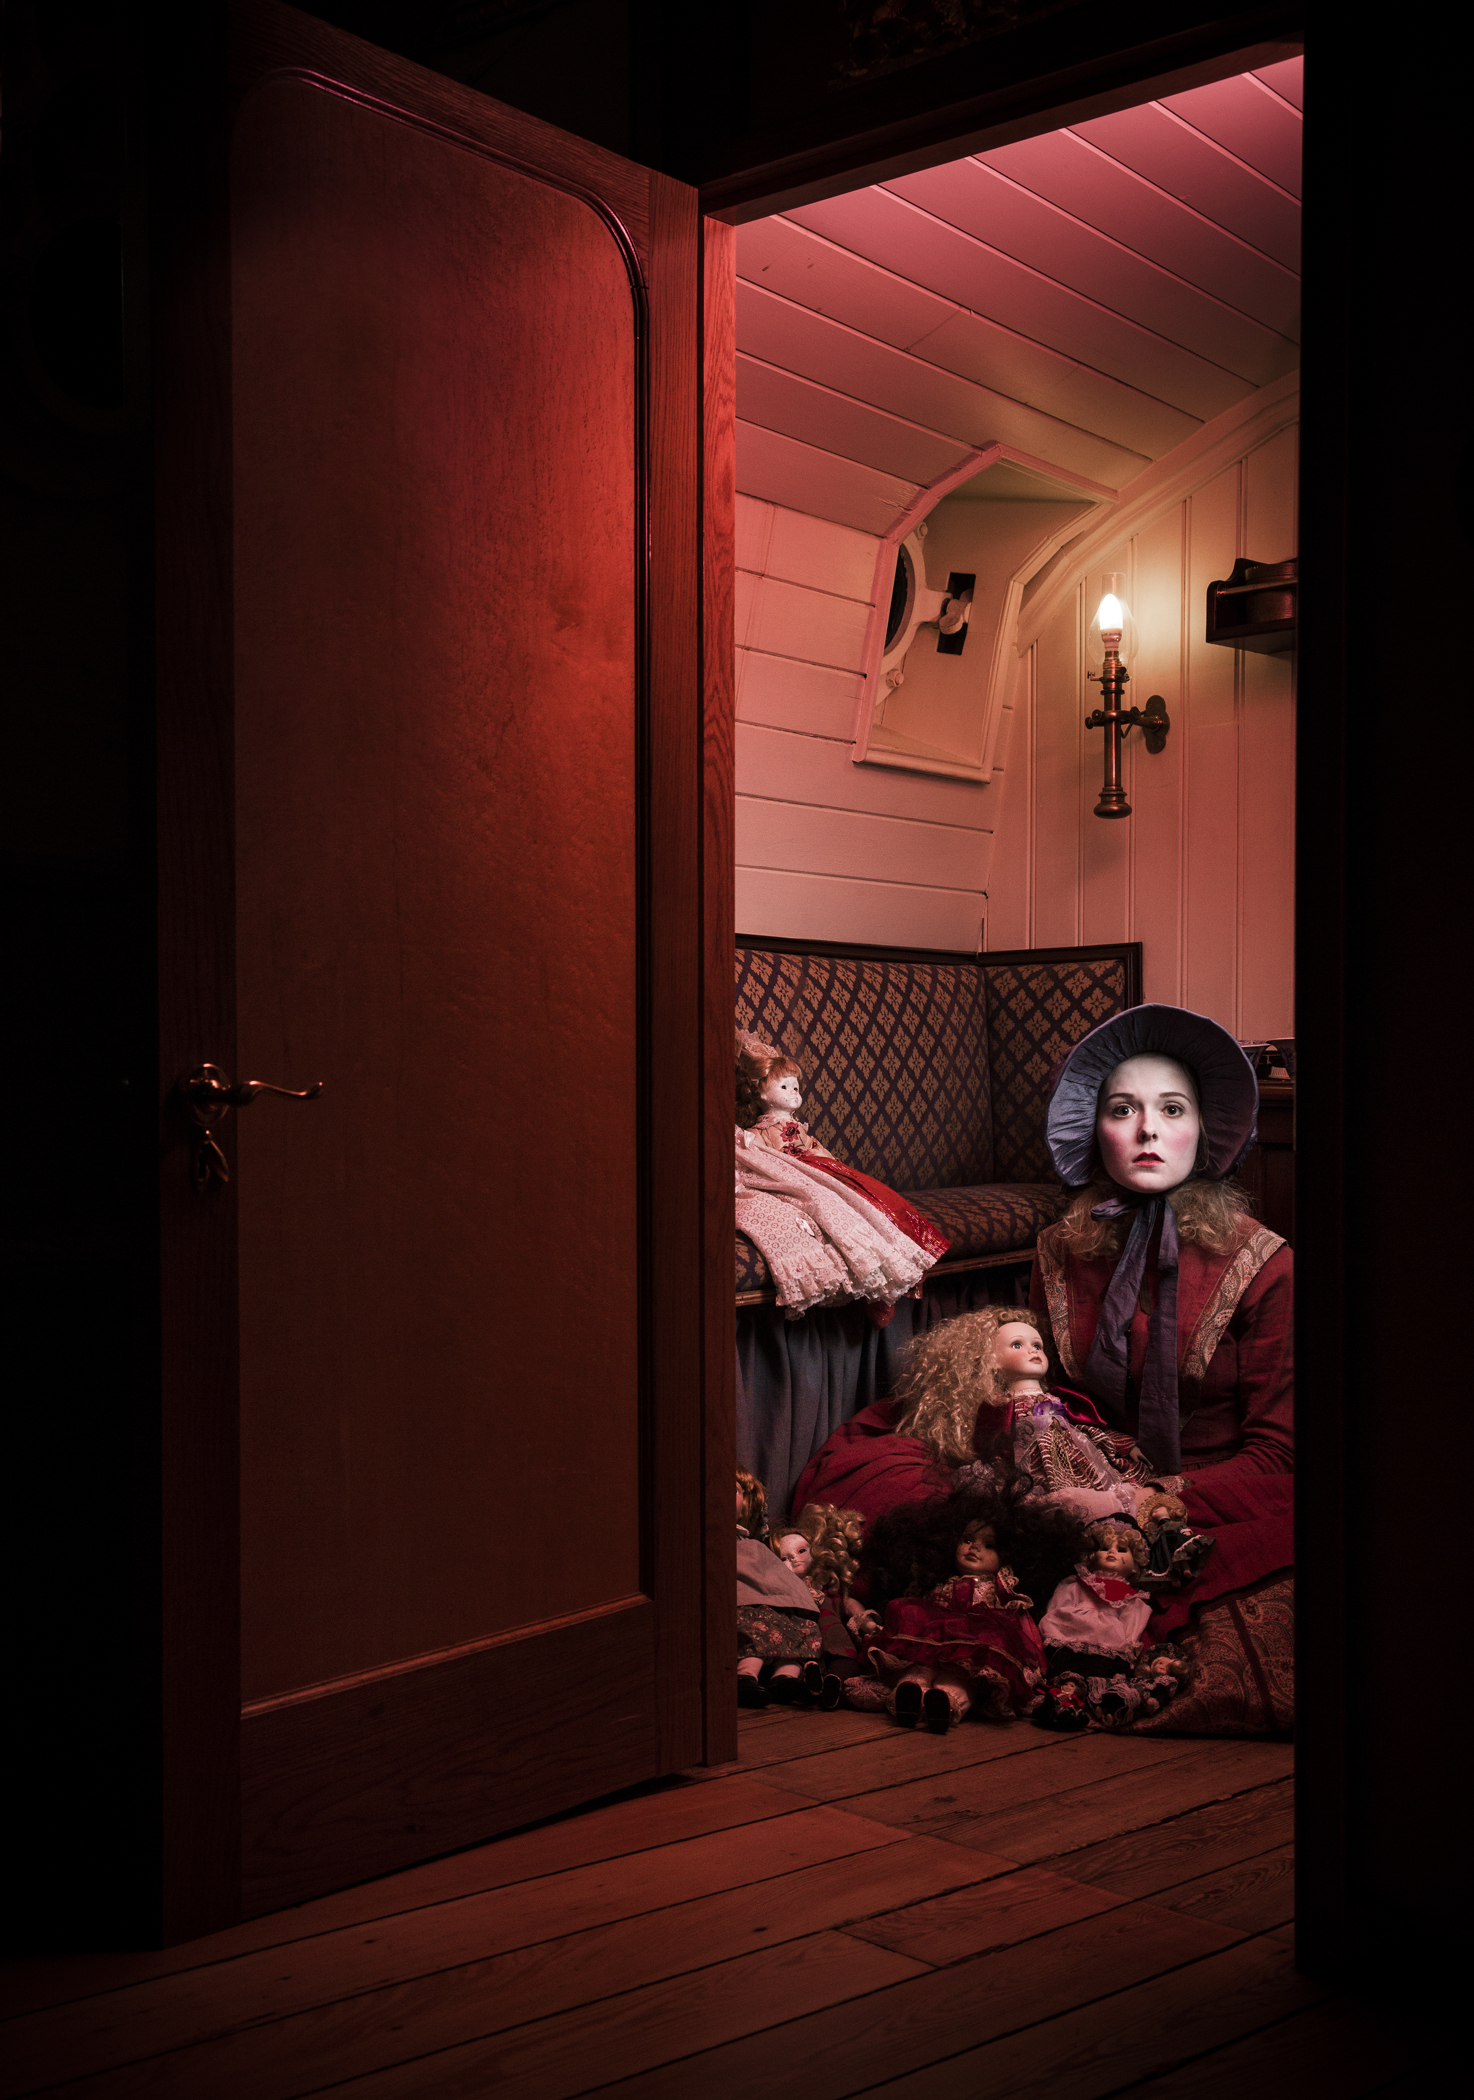 ss Great Britain, Halloween. 31 October 2015 Photo by Adam Gasson / adamgasson.com